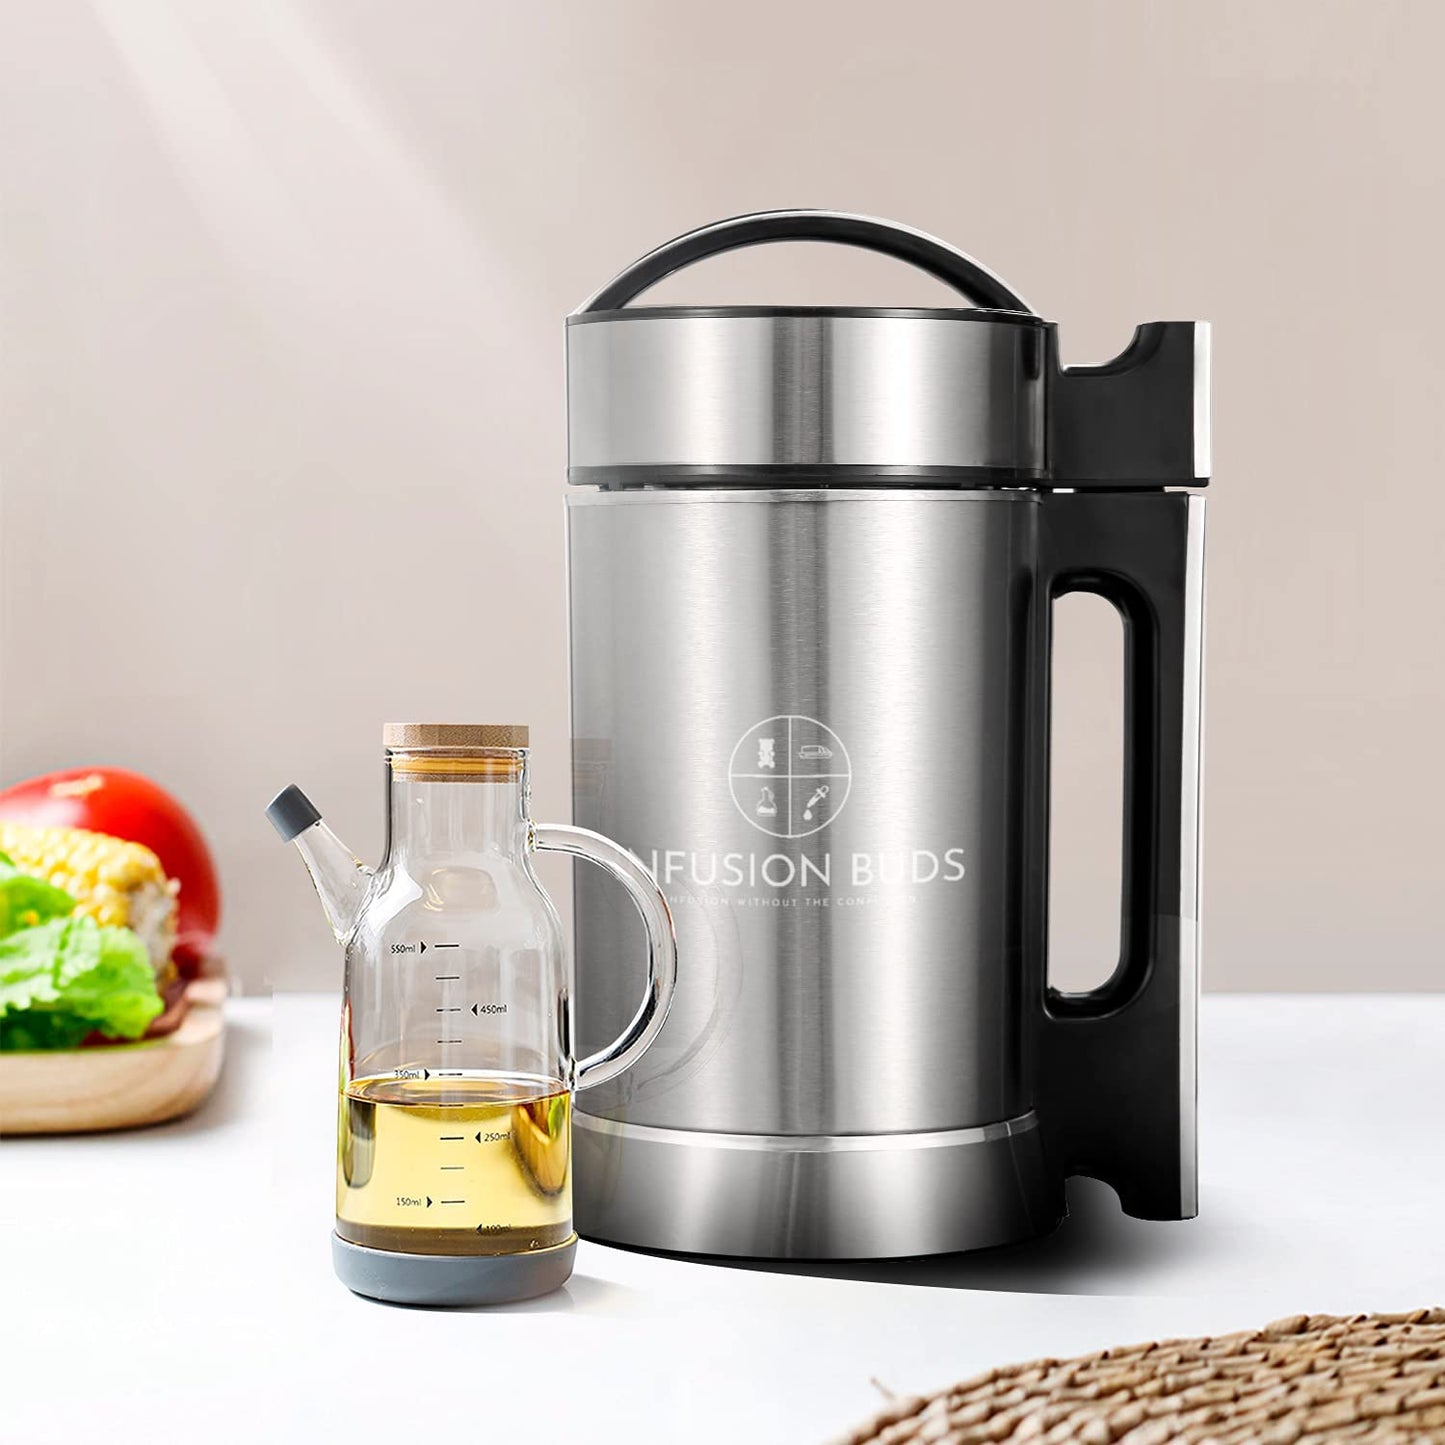 Infusion Buds Butter Infuser Machine- Herbal Butter Maker Machine | Herbal Butter & Oil Infuser Machine. Butter Machine | Includes Decarb Box and Tons of Accessories